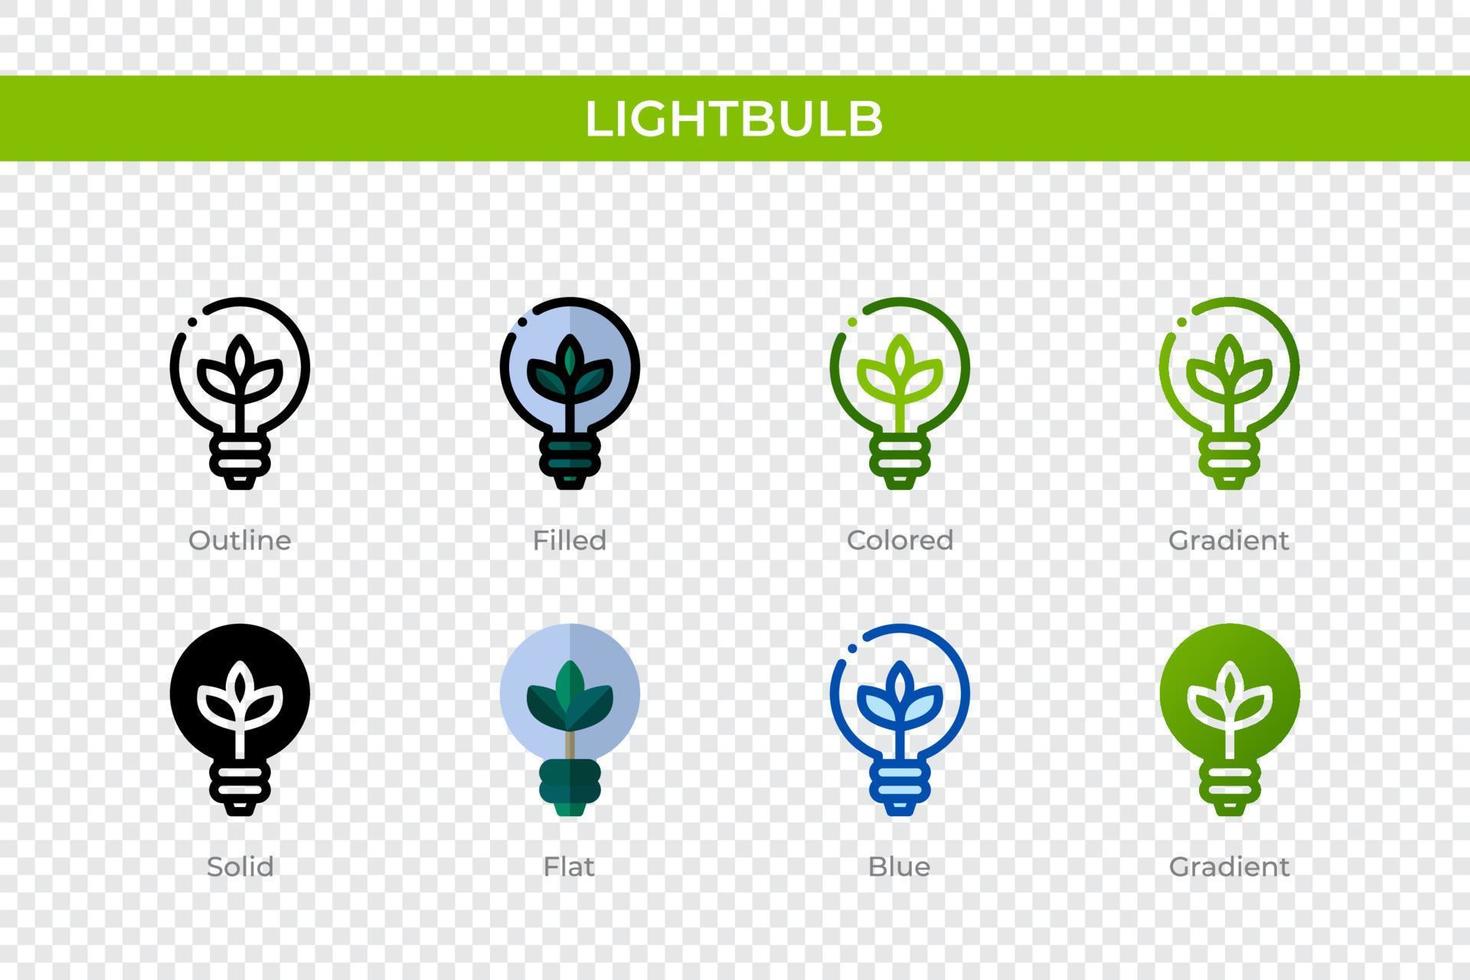 Lightbulb icon in different style. Lightbulb vector icons designed in outline, solid, colored, filled, gradient, and flat style. Symbol, logo illustration. Vector illustration